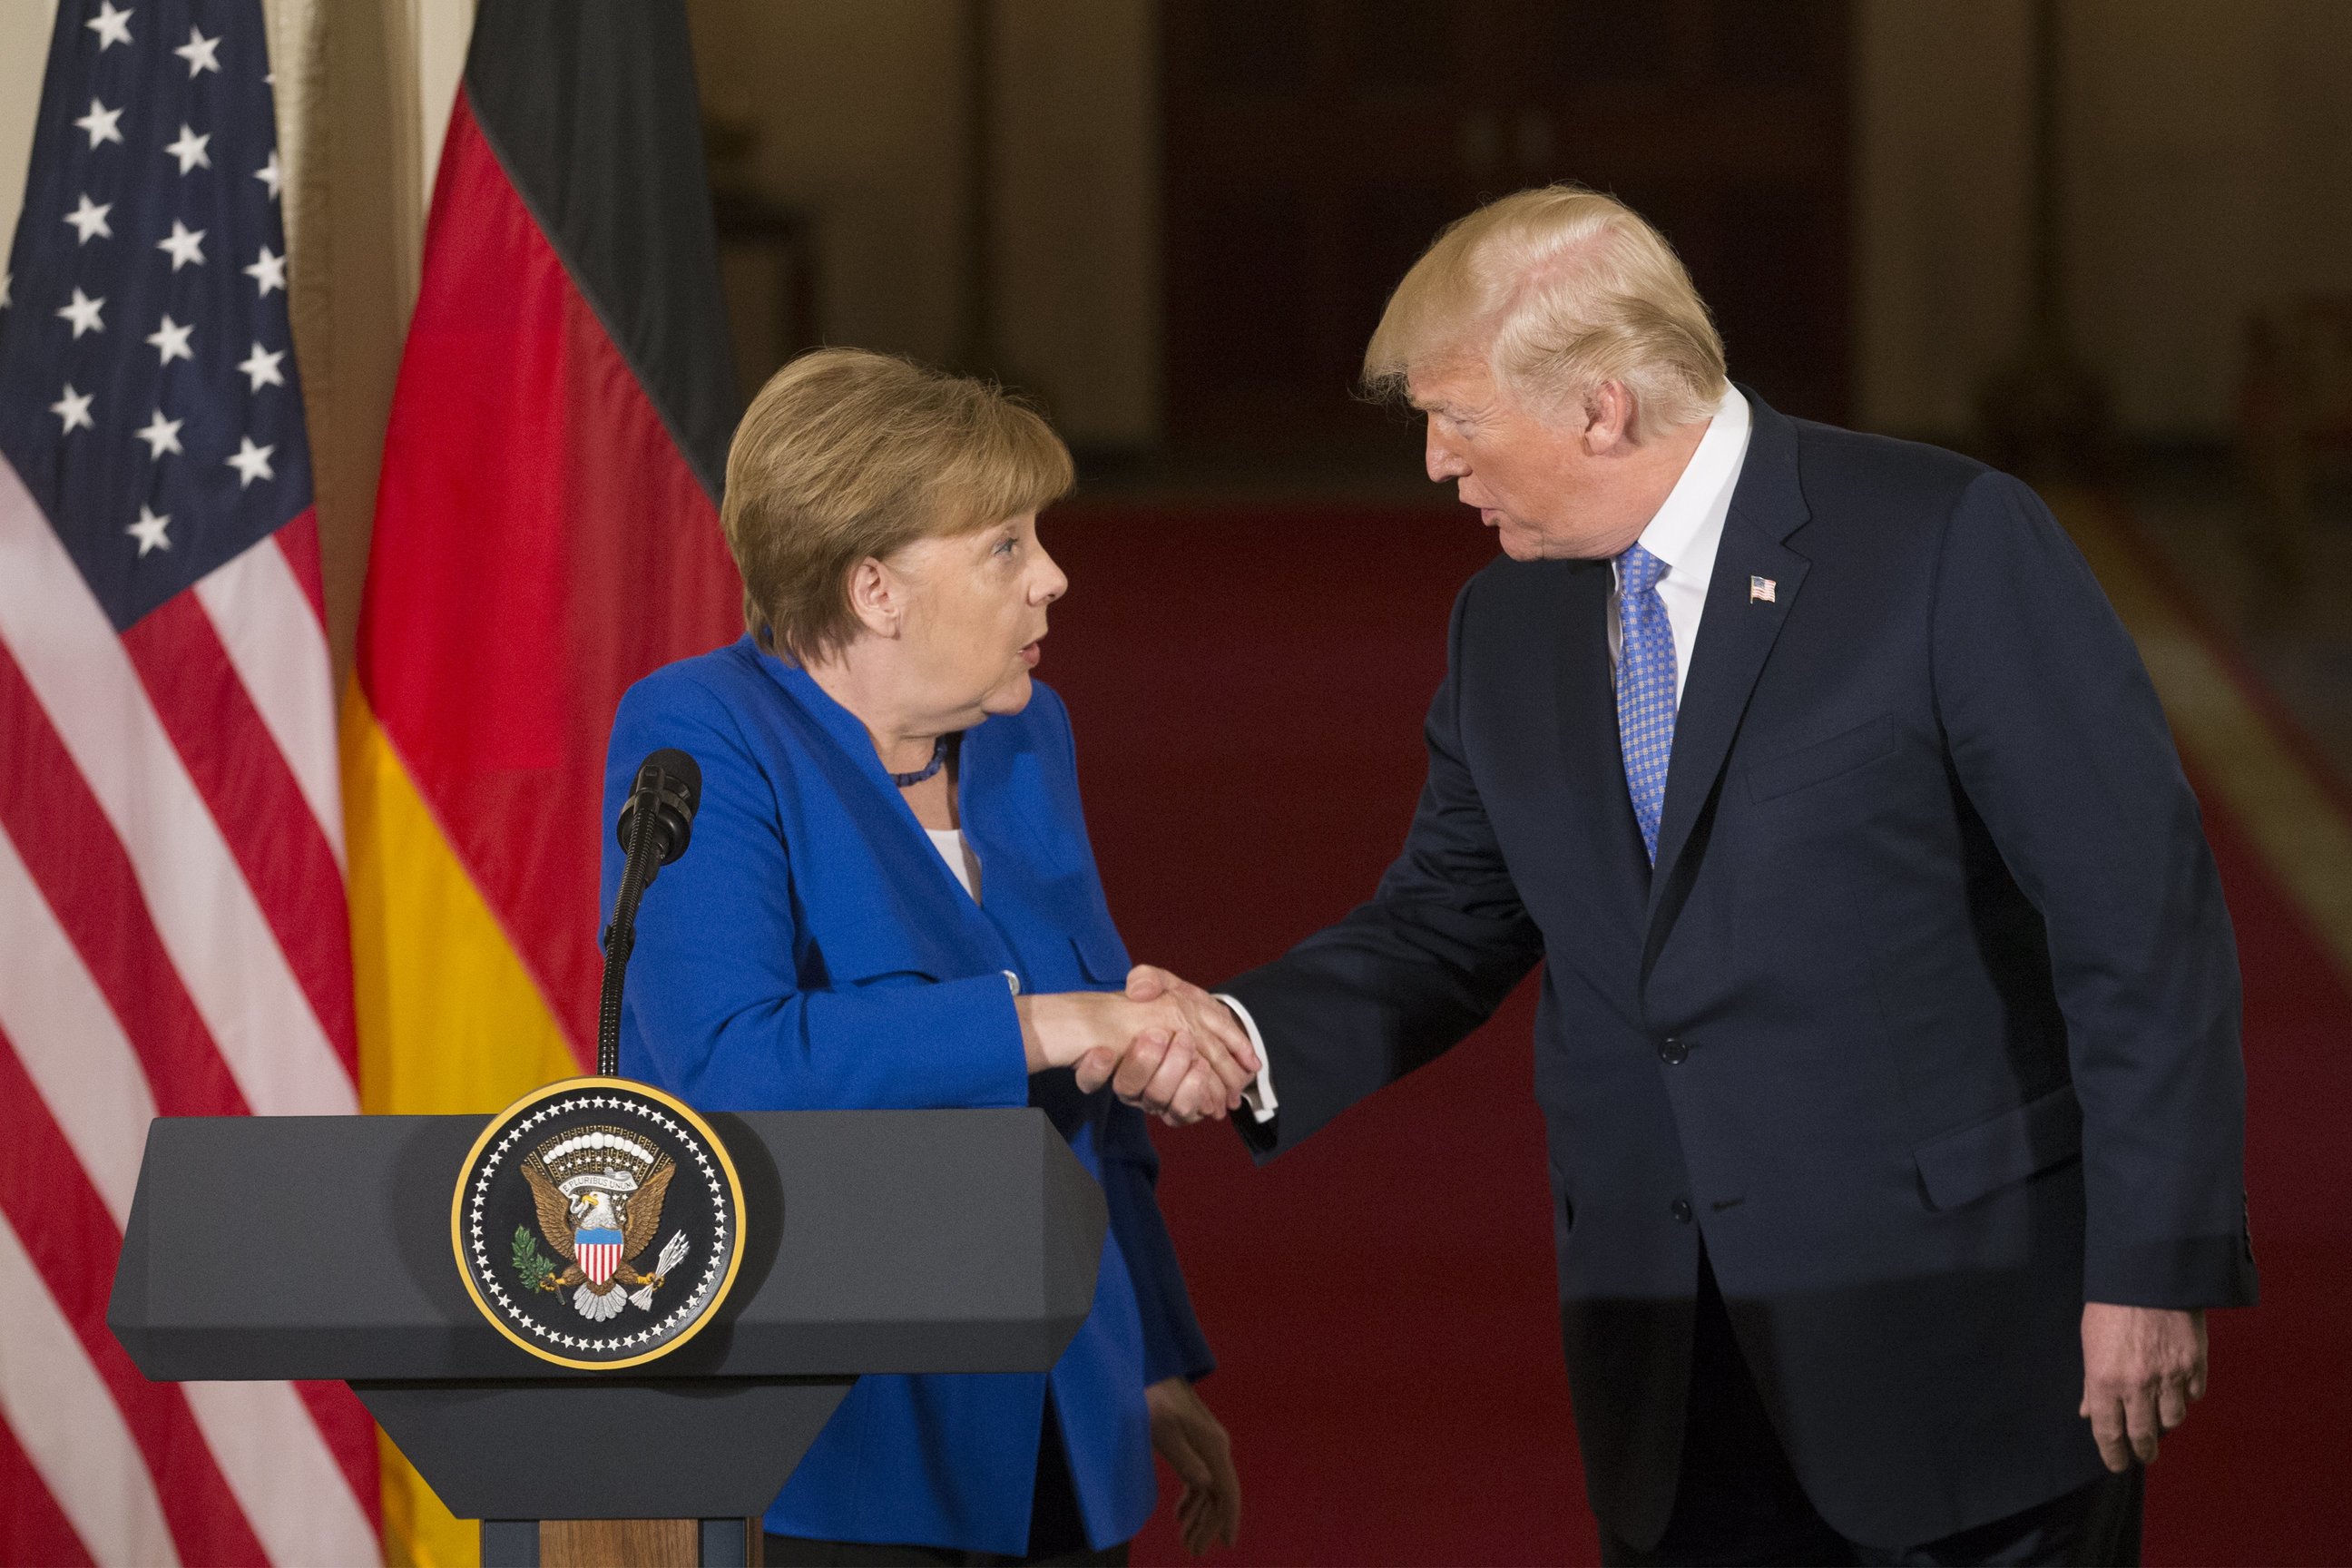 epa06697573 US President Donald J. Trump (R) and Chancellor of Germany Angela Merkel (L) shake hands while holding a joint news conference in the East Room of the White House in Washington, DC, USA, 27 April 2018. Merkel is on a one-day working visit to the White House where she and President Trump were expected to discuss trade issues such as proposed US tariffs on European steel and aluminum products, in addition to topics such as NATO.  EPA/MICHAEL REYNOLDS